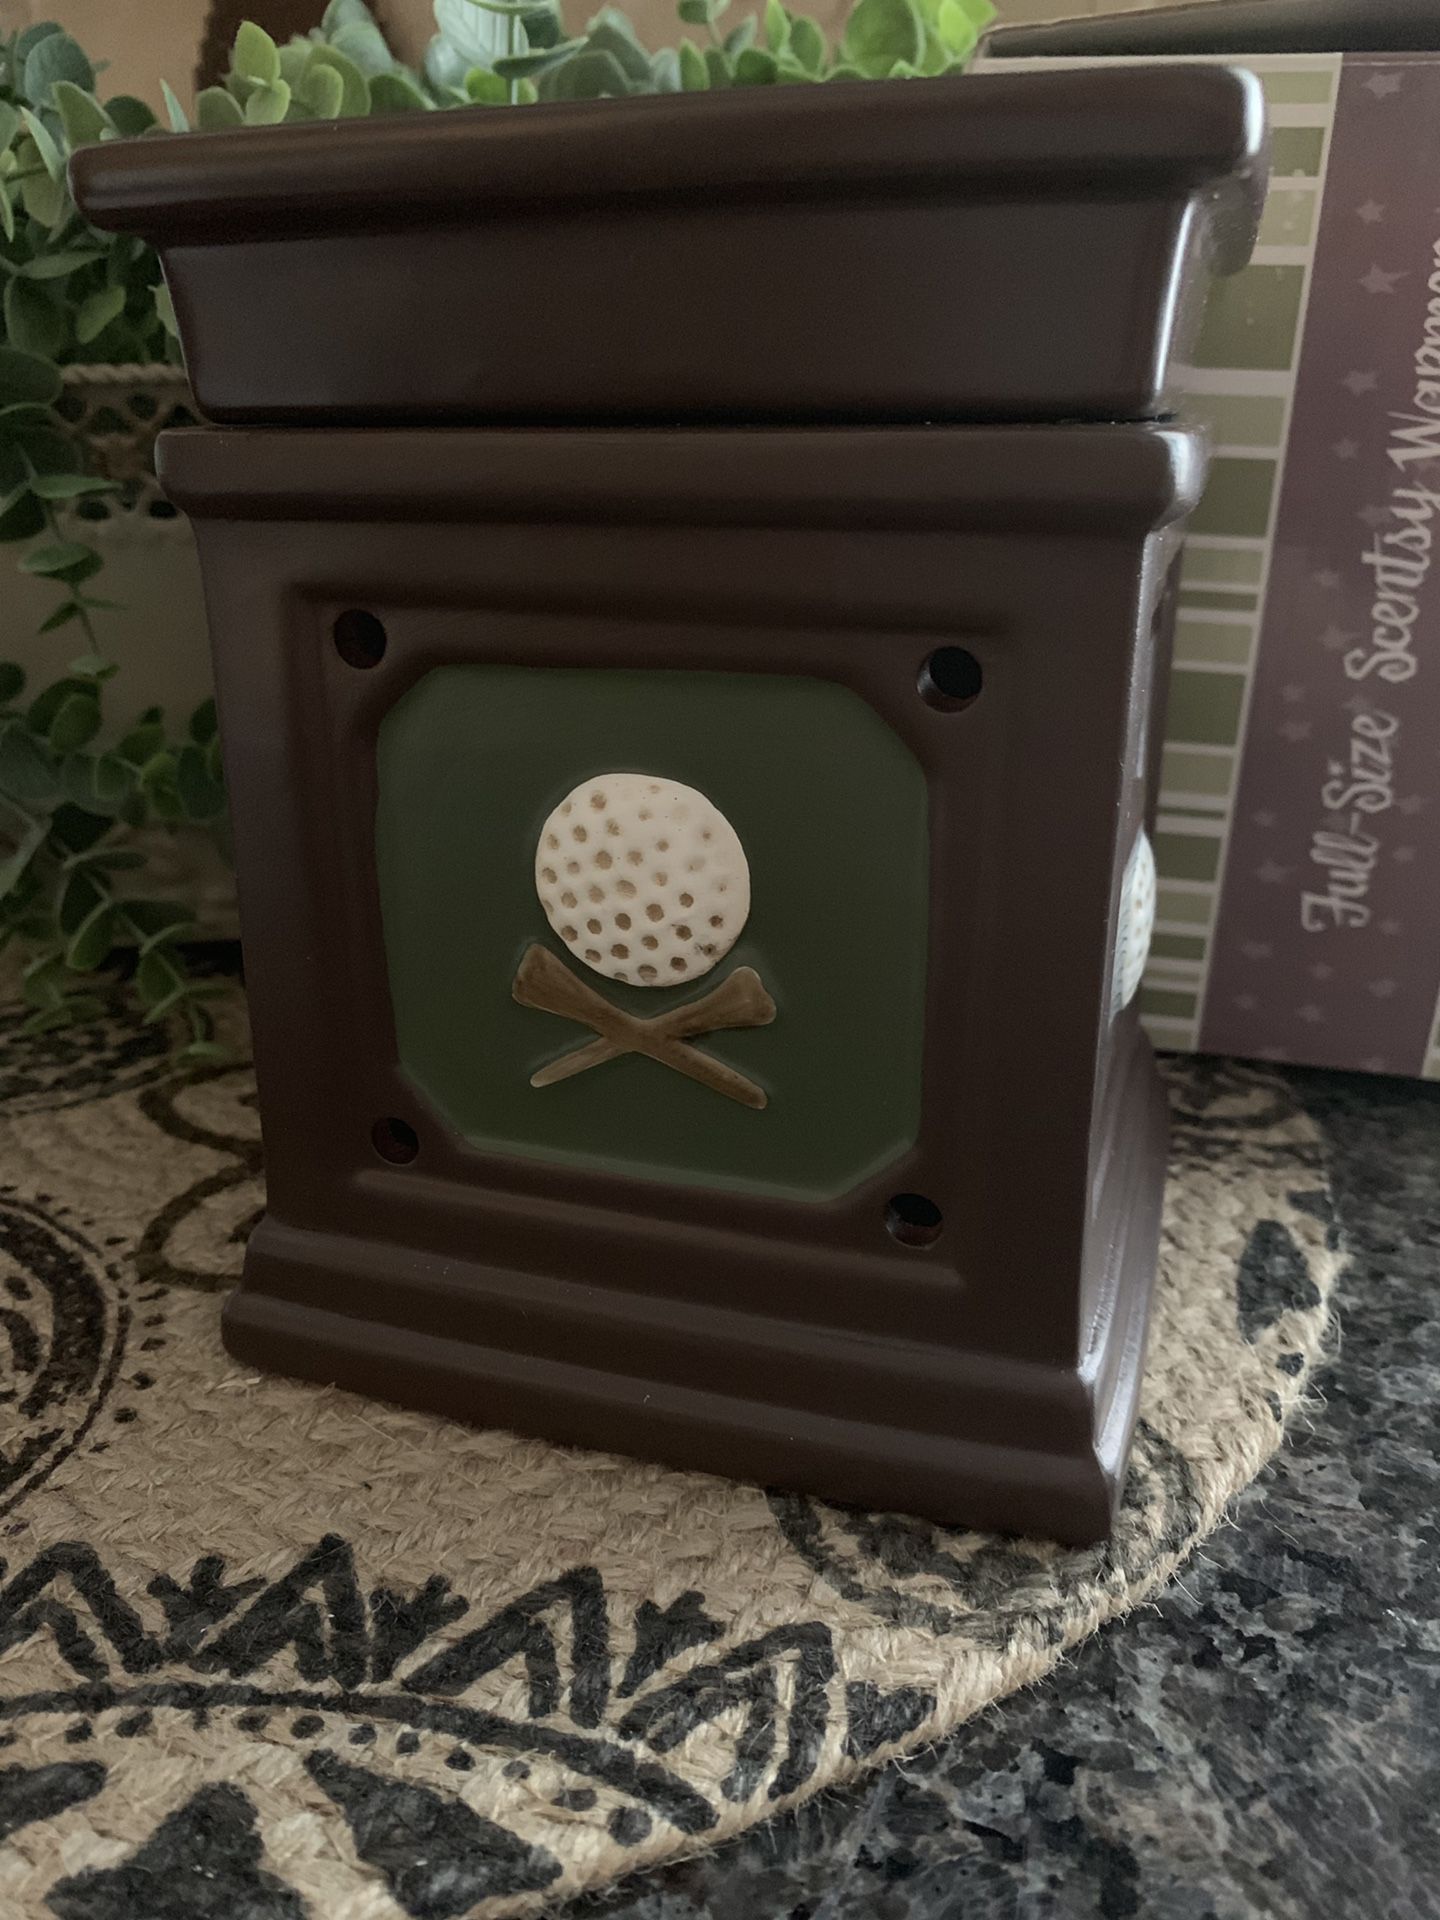 Scentsy “Fore” Full Size Warmer